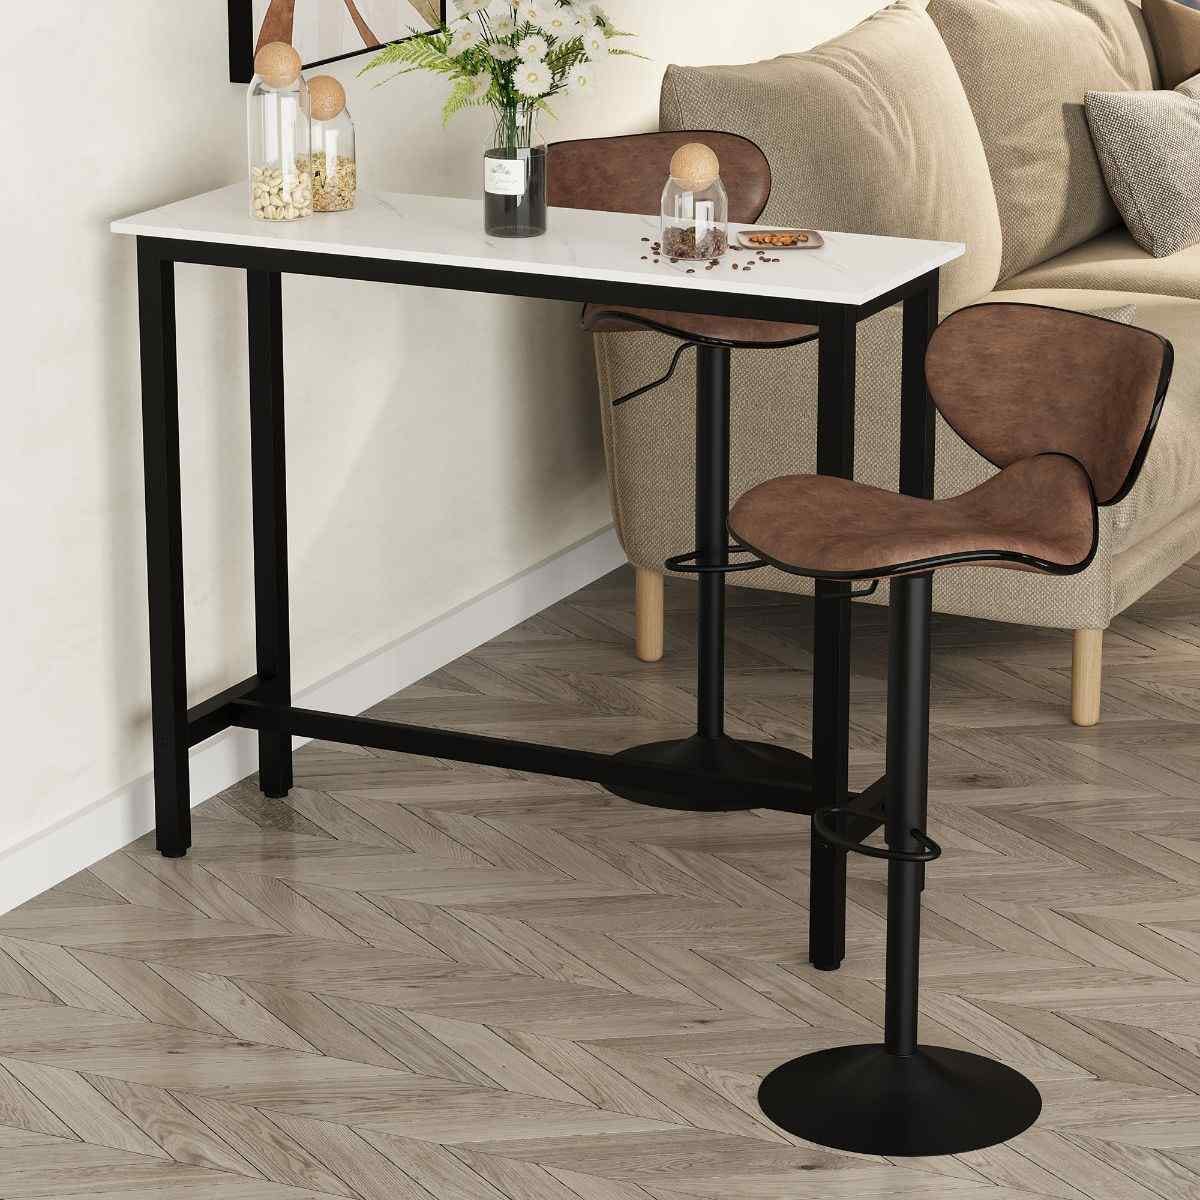 Homcom Bar Table Breakfast Dining Table Marble Effect Top With Adjustable Footpads